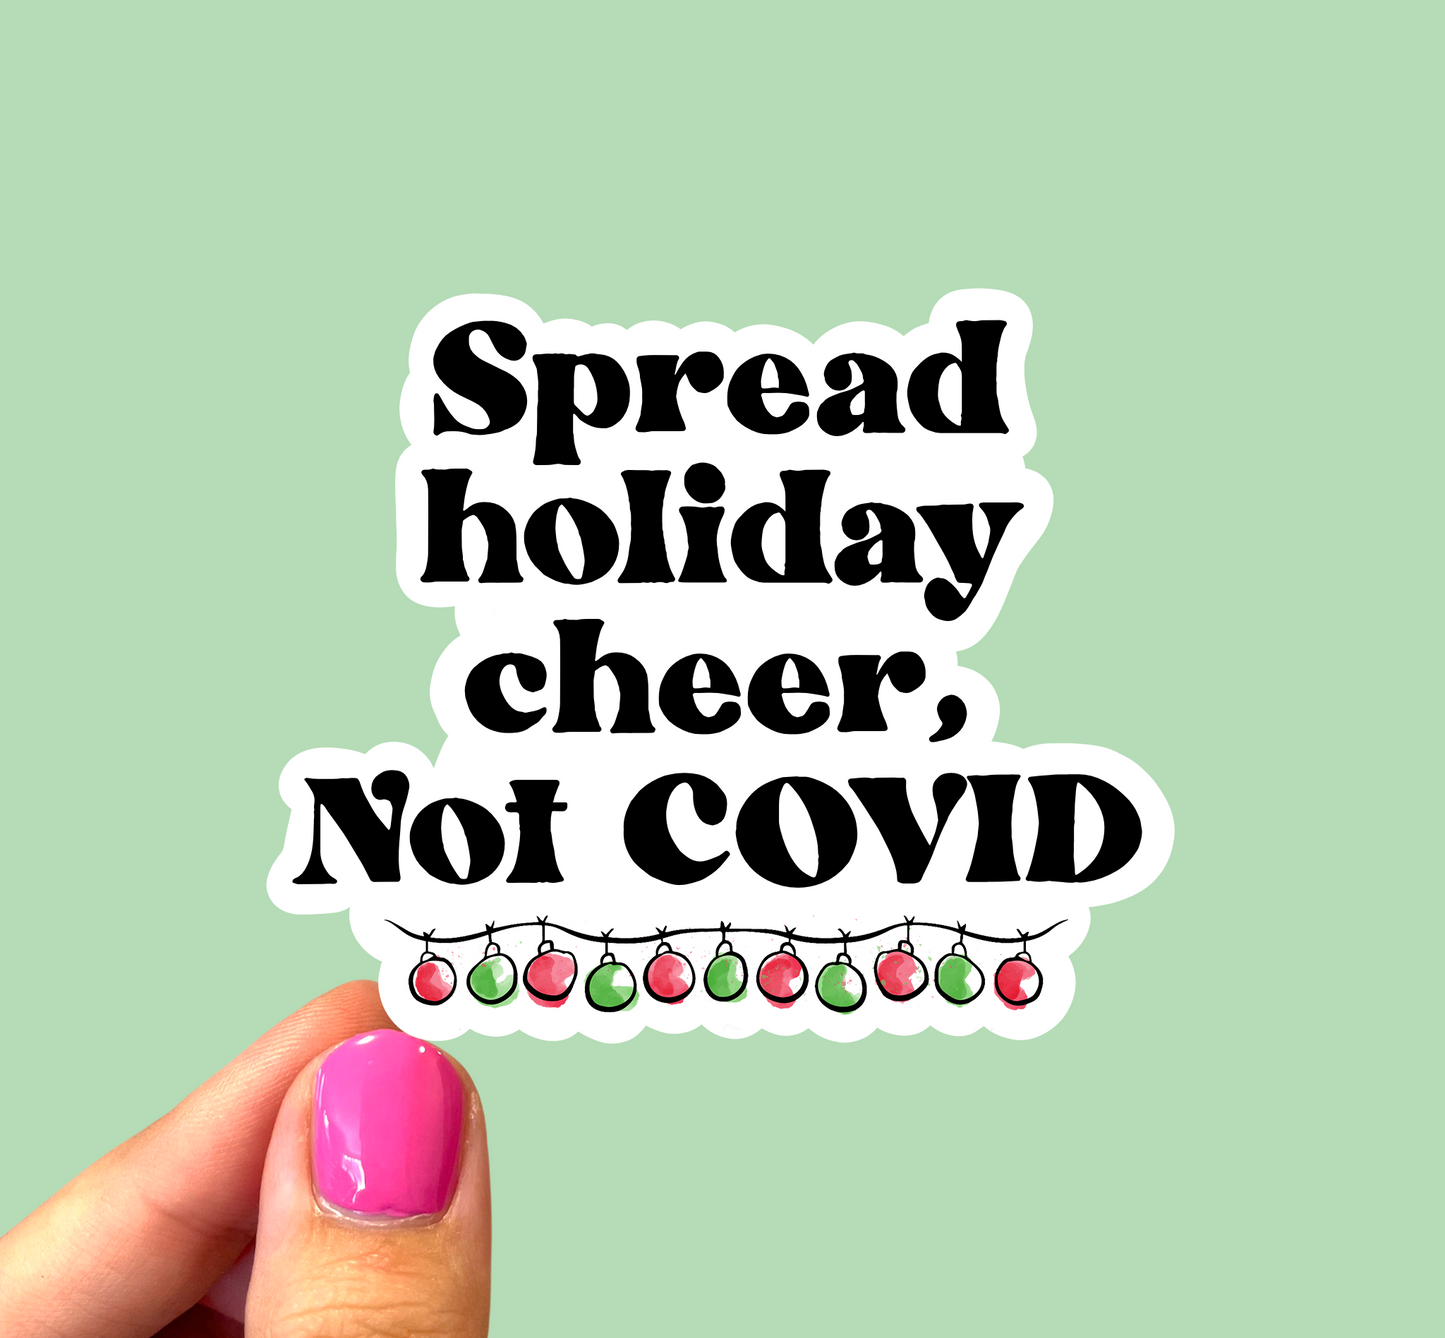 Spread holiday cheer not Covid